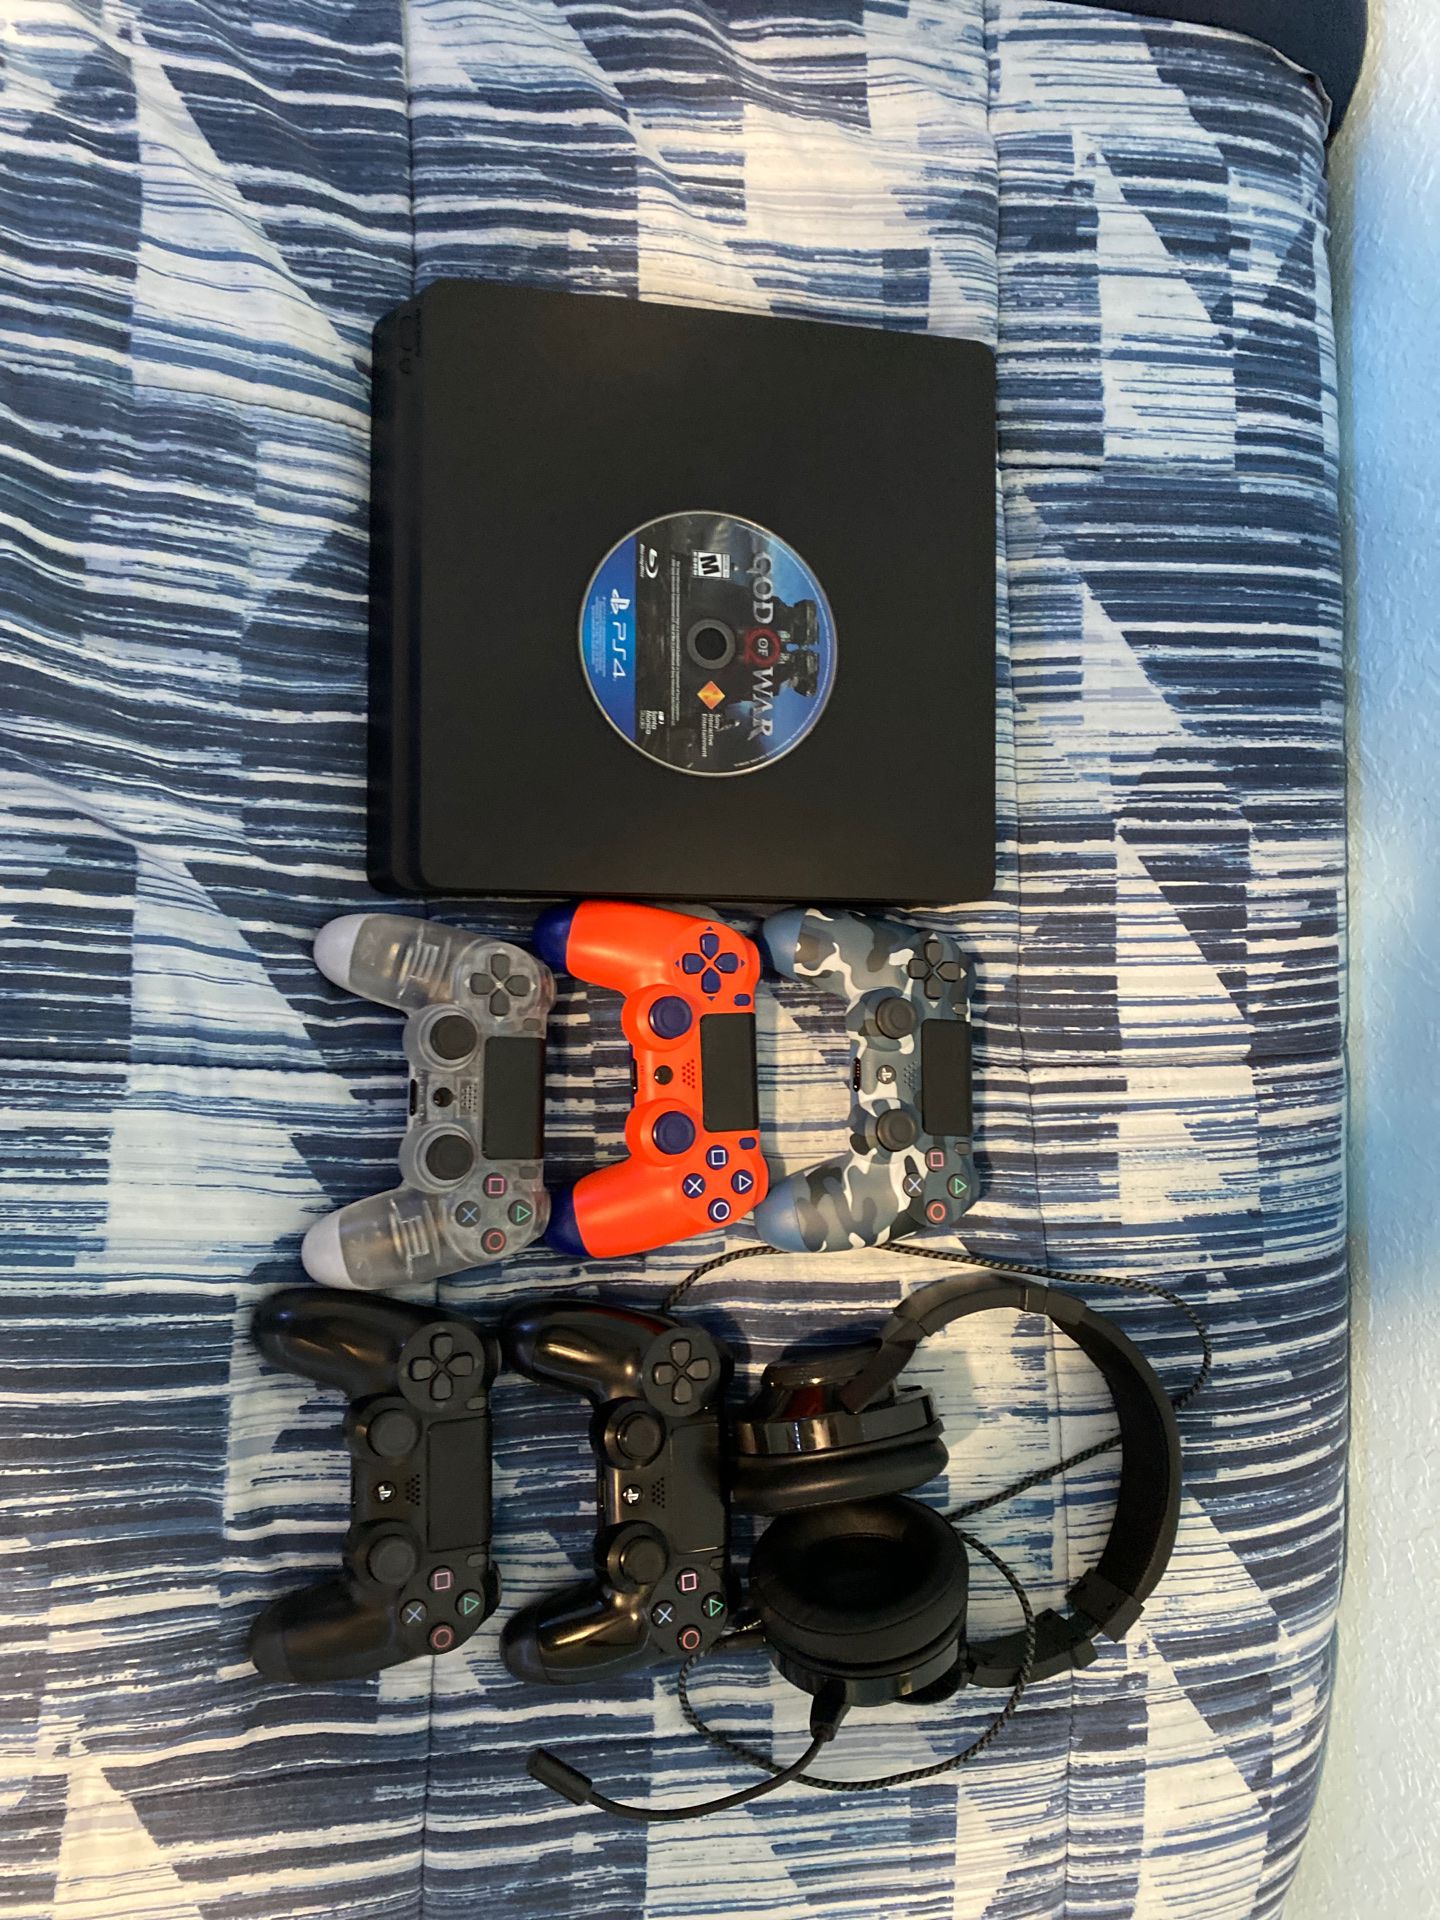 -PlayStation4 with five wireless controllers (4 used and one new), a pair of headphones and a disc game (God of War). PlayStation4 con cinco control